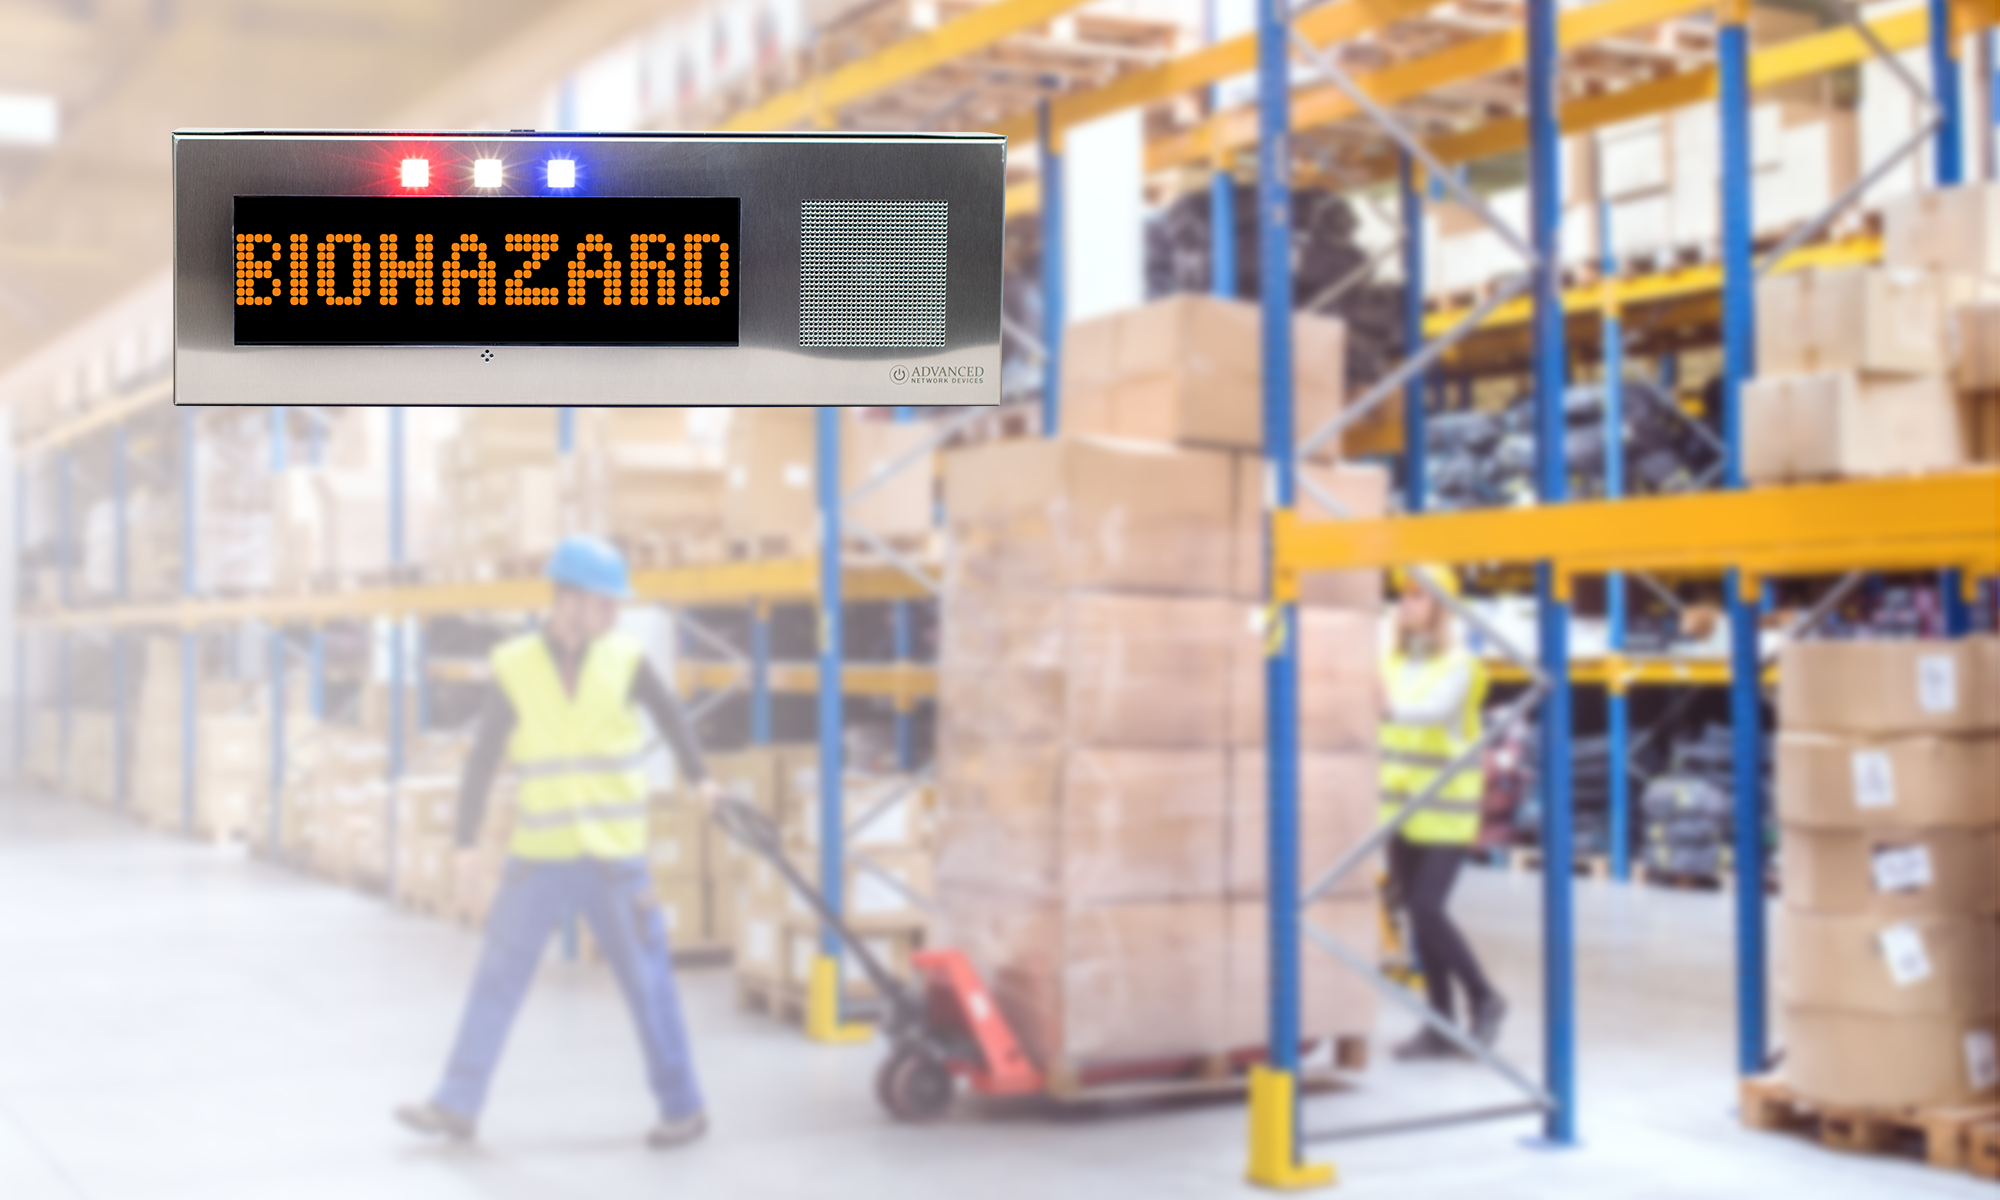 hazard-alerts-on-large-ip-display-in-industrial-facility